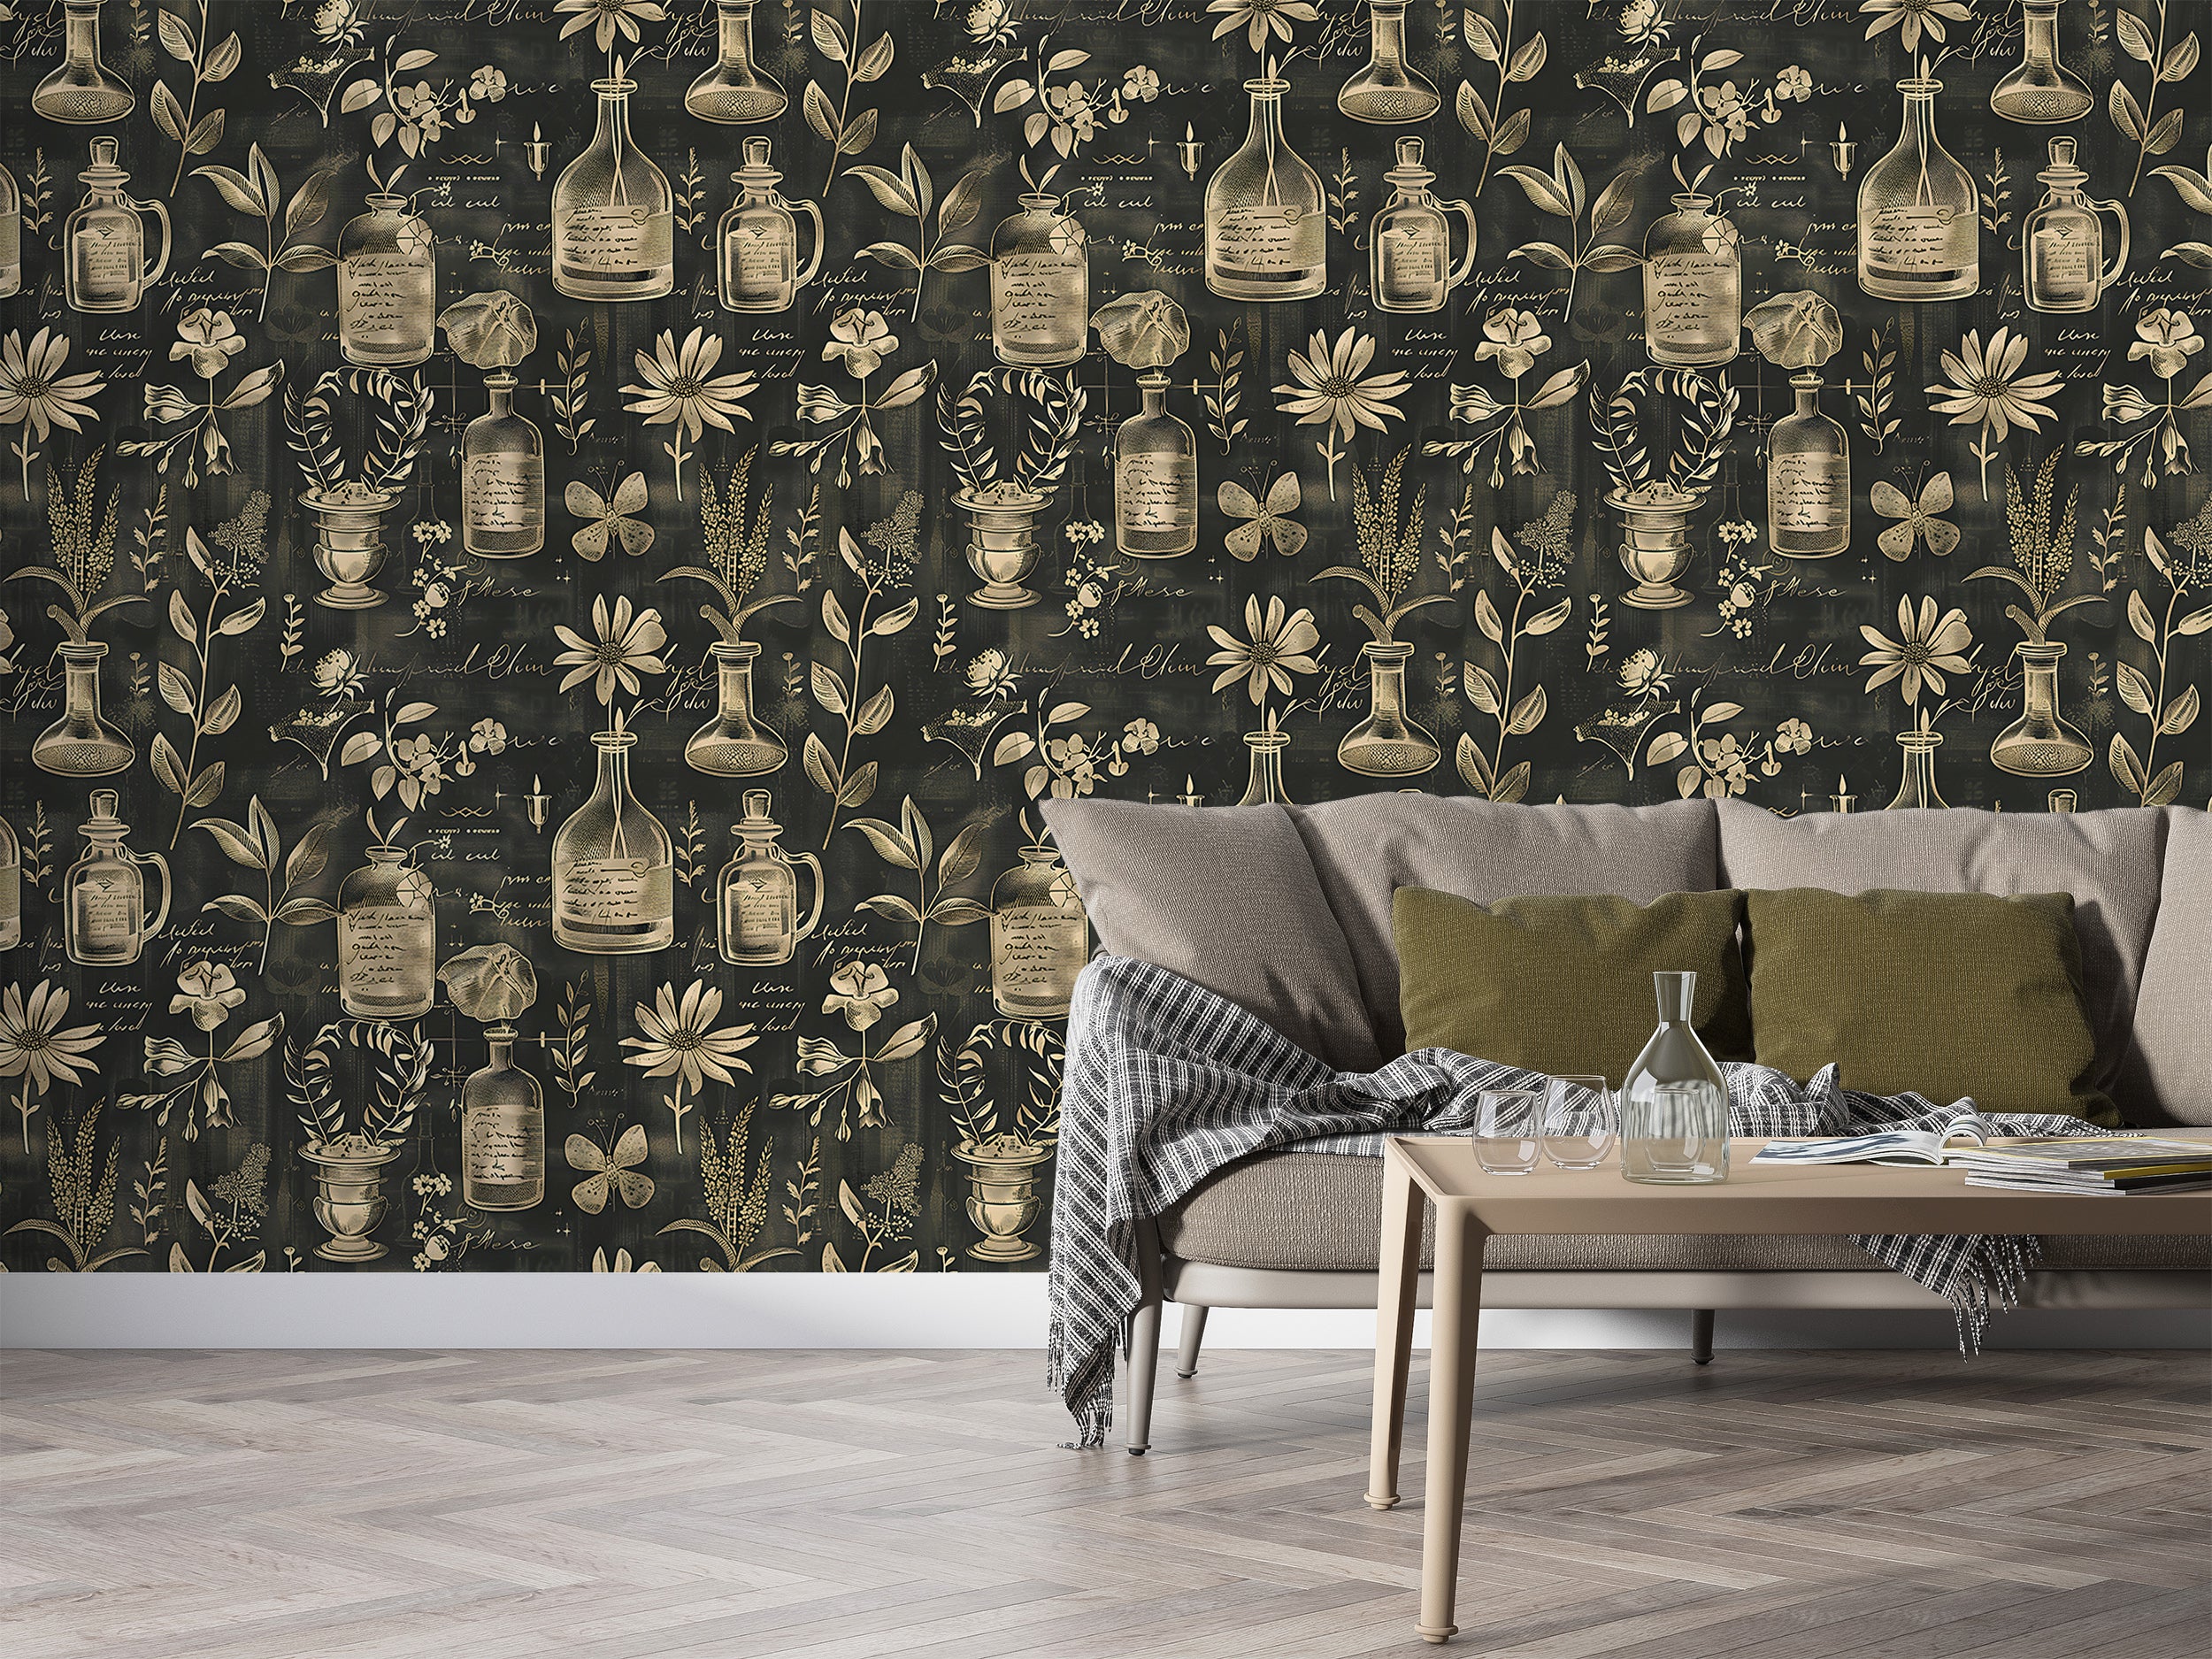 Removable old style wallpaper Alchemy-themed wall decor